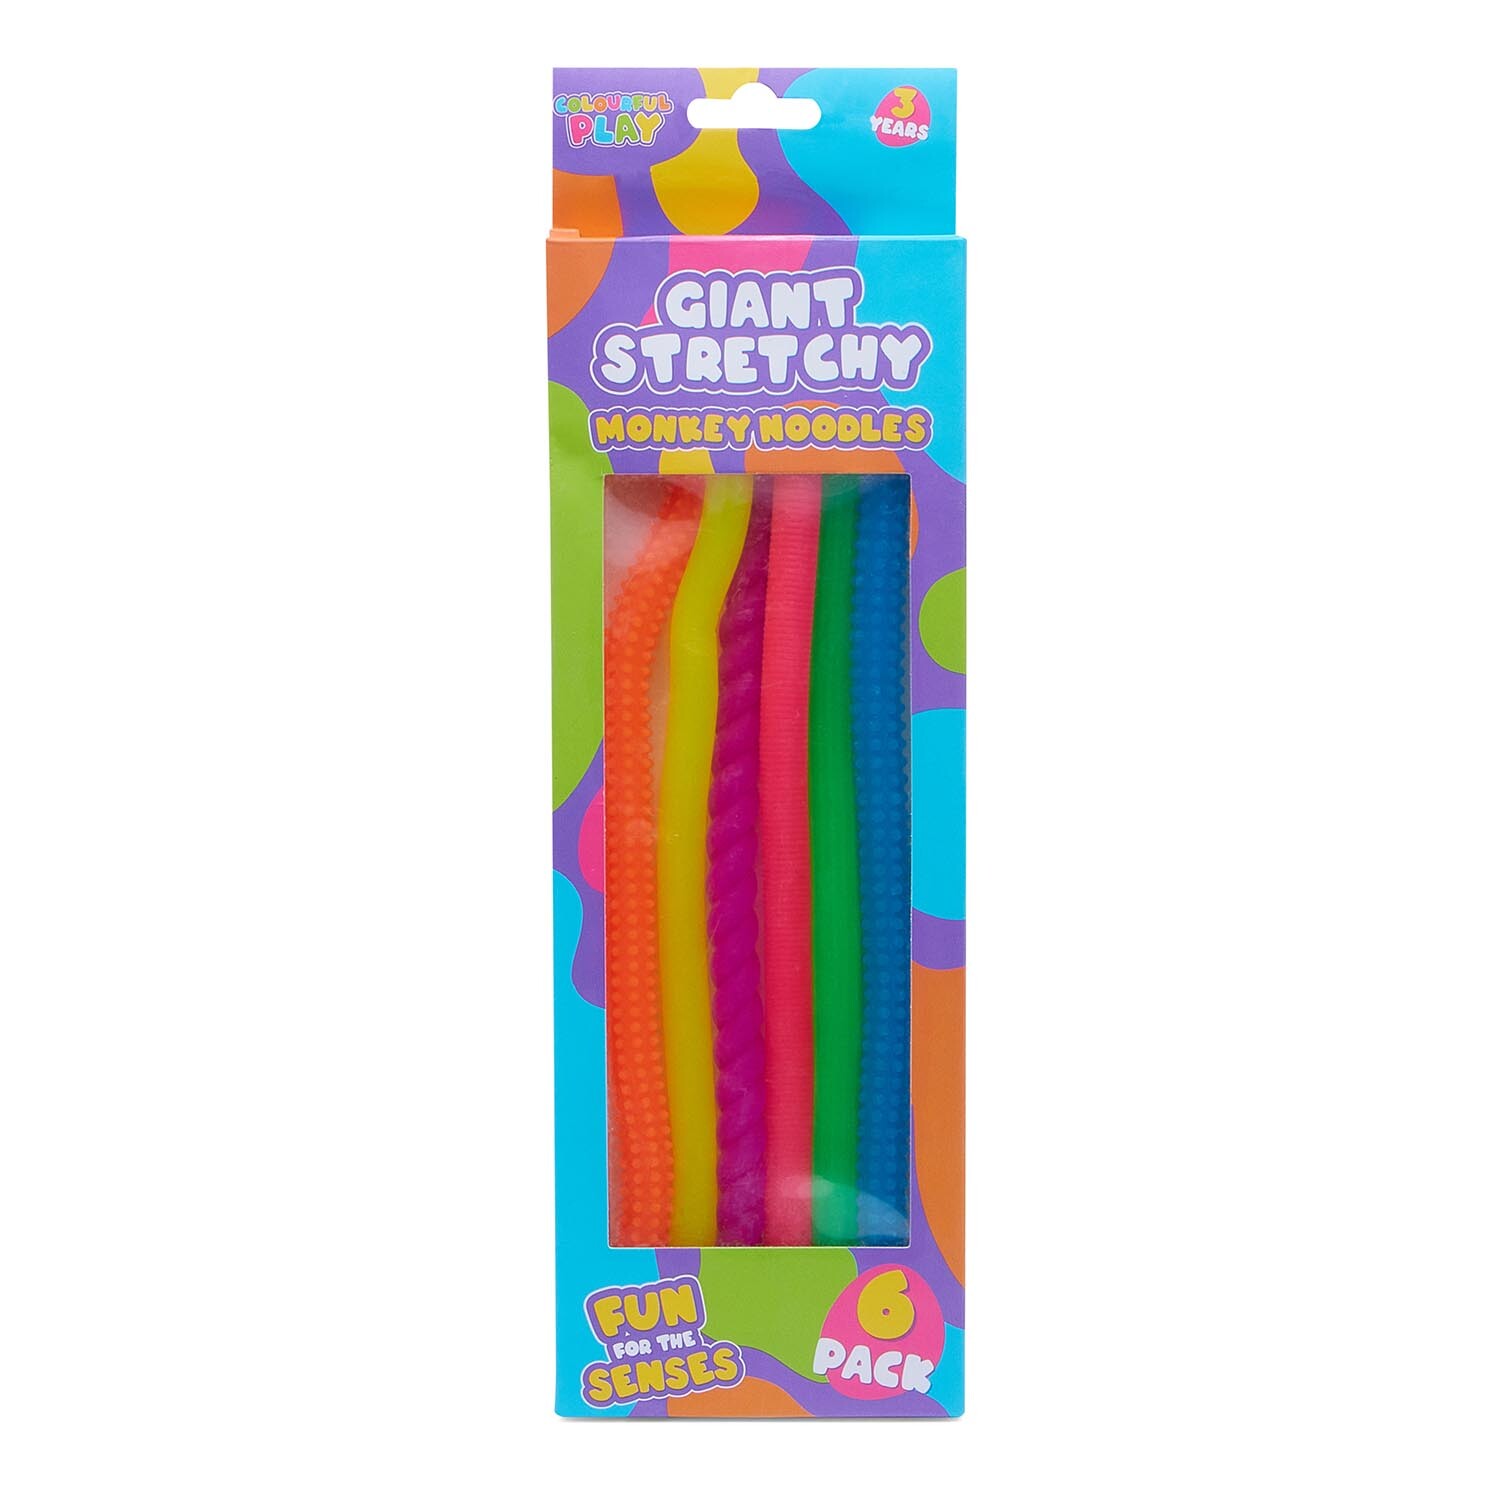 6 Pack of Giant Stretchy Money Noodles Image